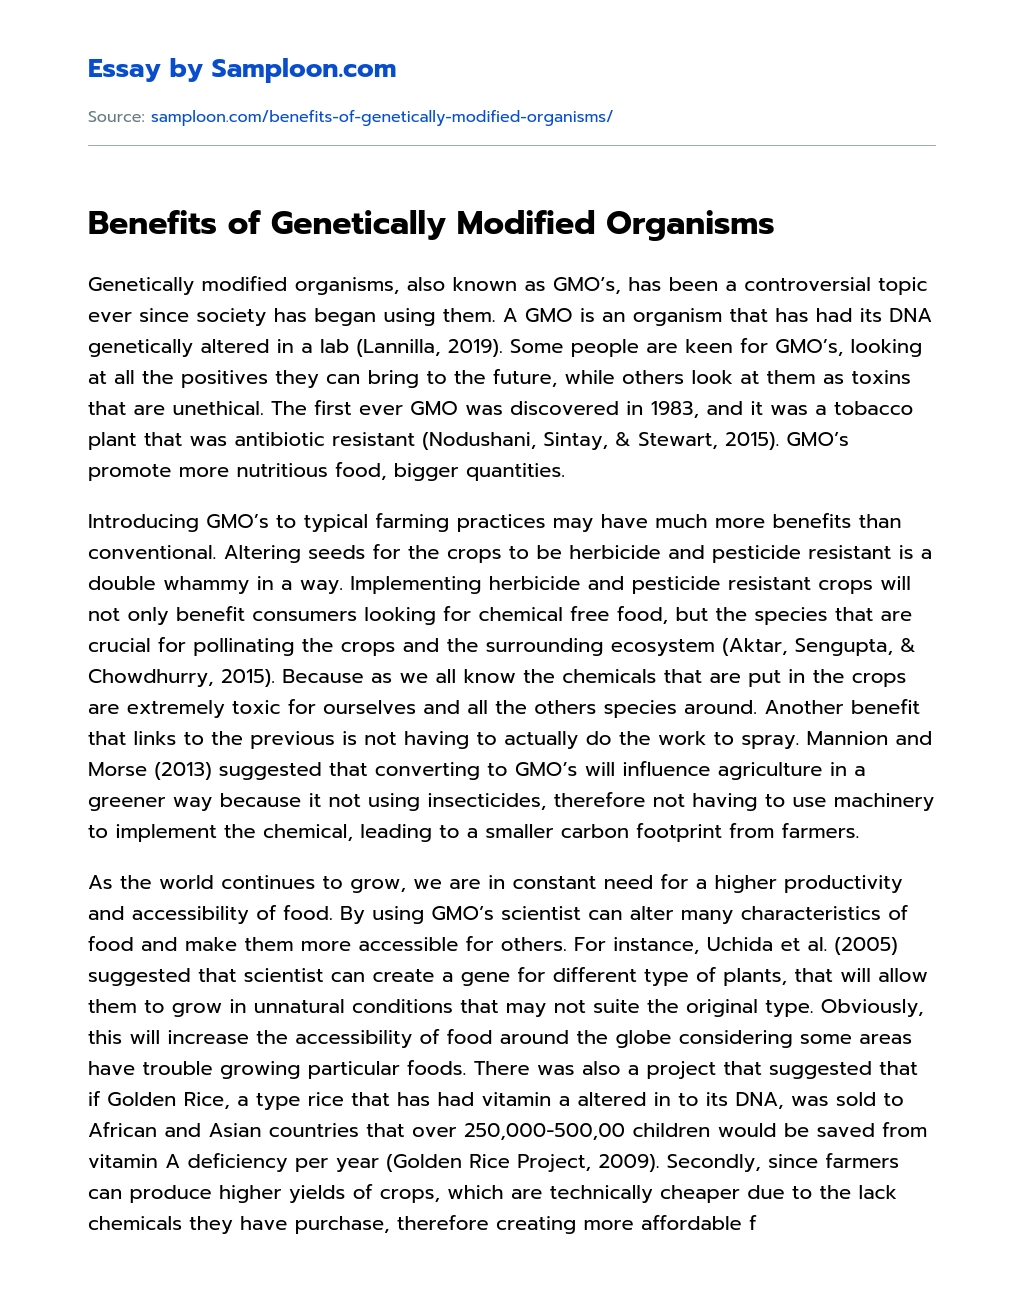 Benefits of Genetically Modified Organisms essay